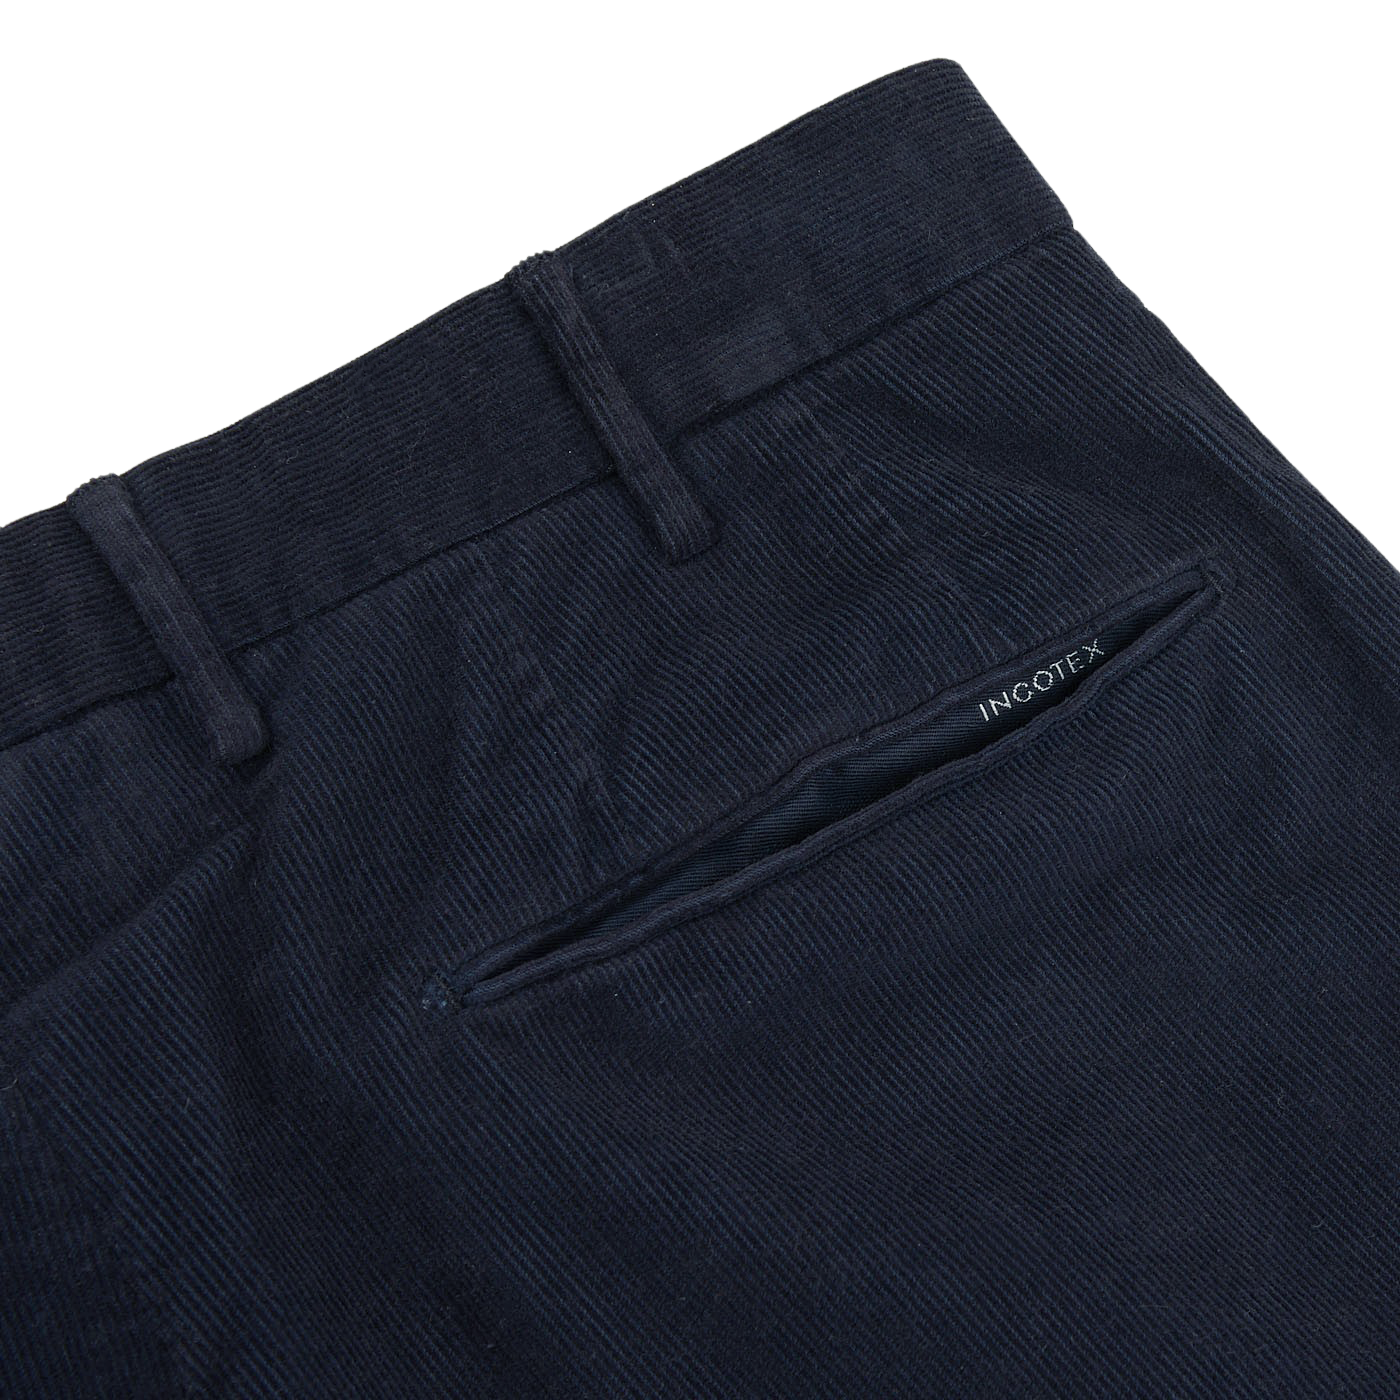 The back pocket of a Navy Blue Micro Cotton Corduroy High Comfort Chinos, a slim fit pant made from comfortable corduroy fabric by Incotex.